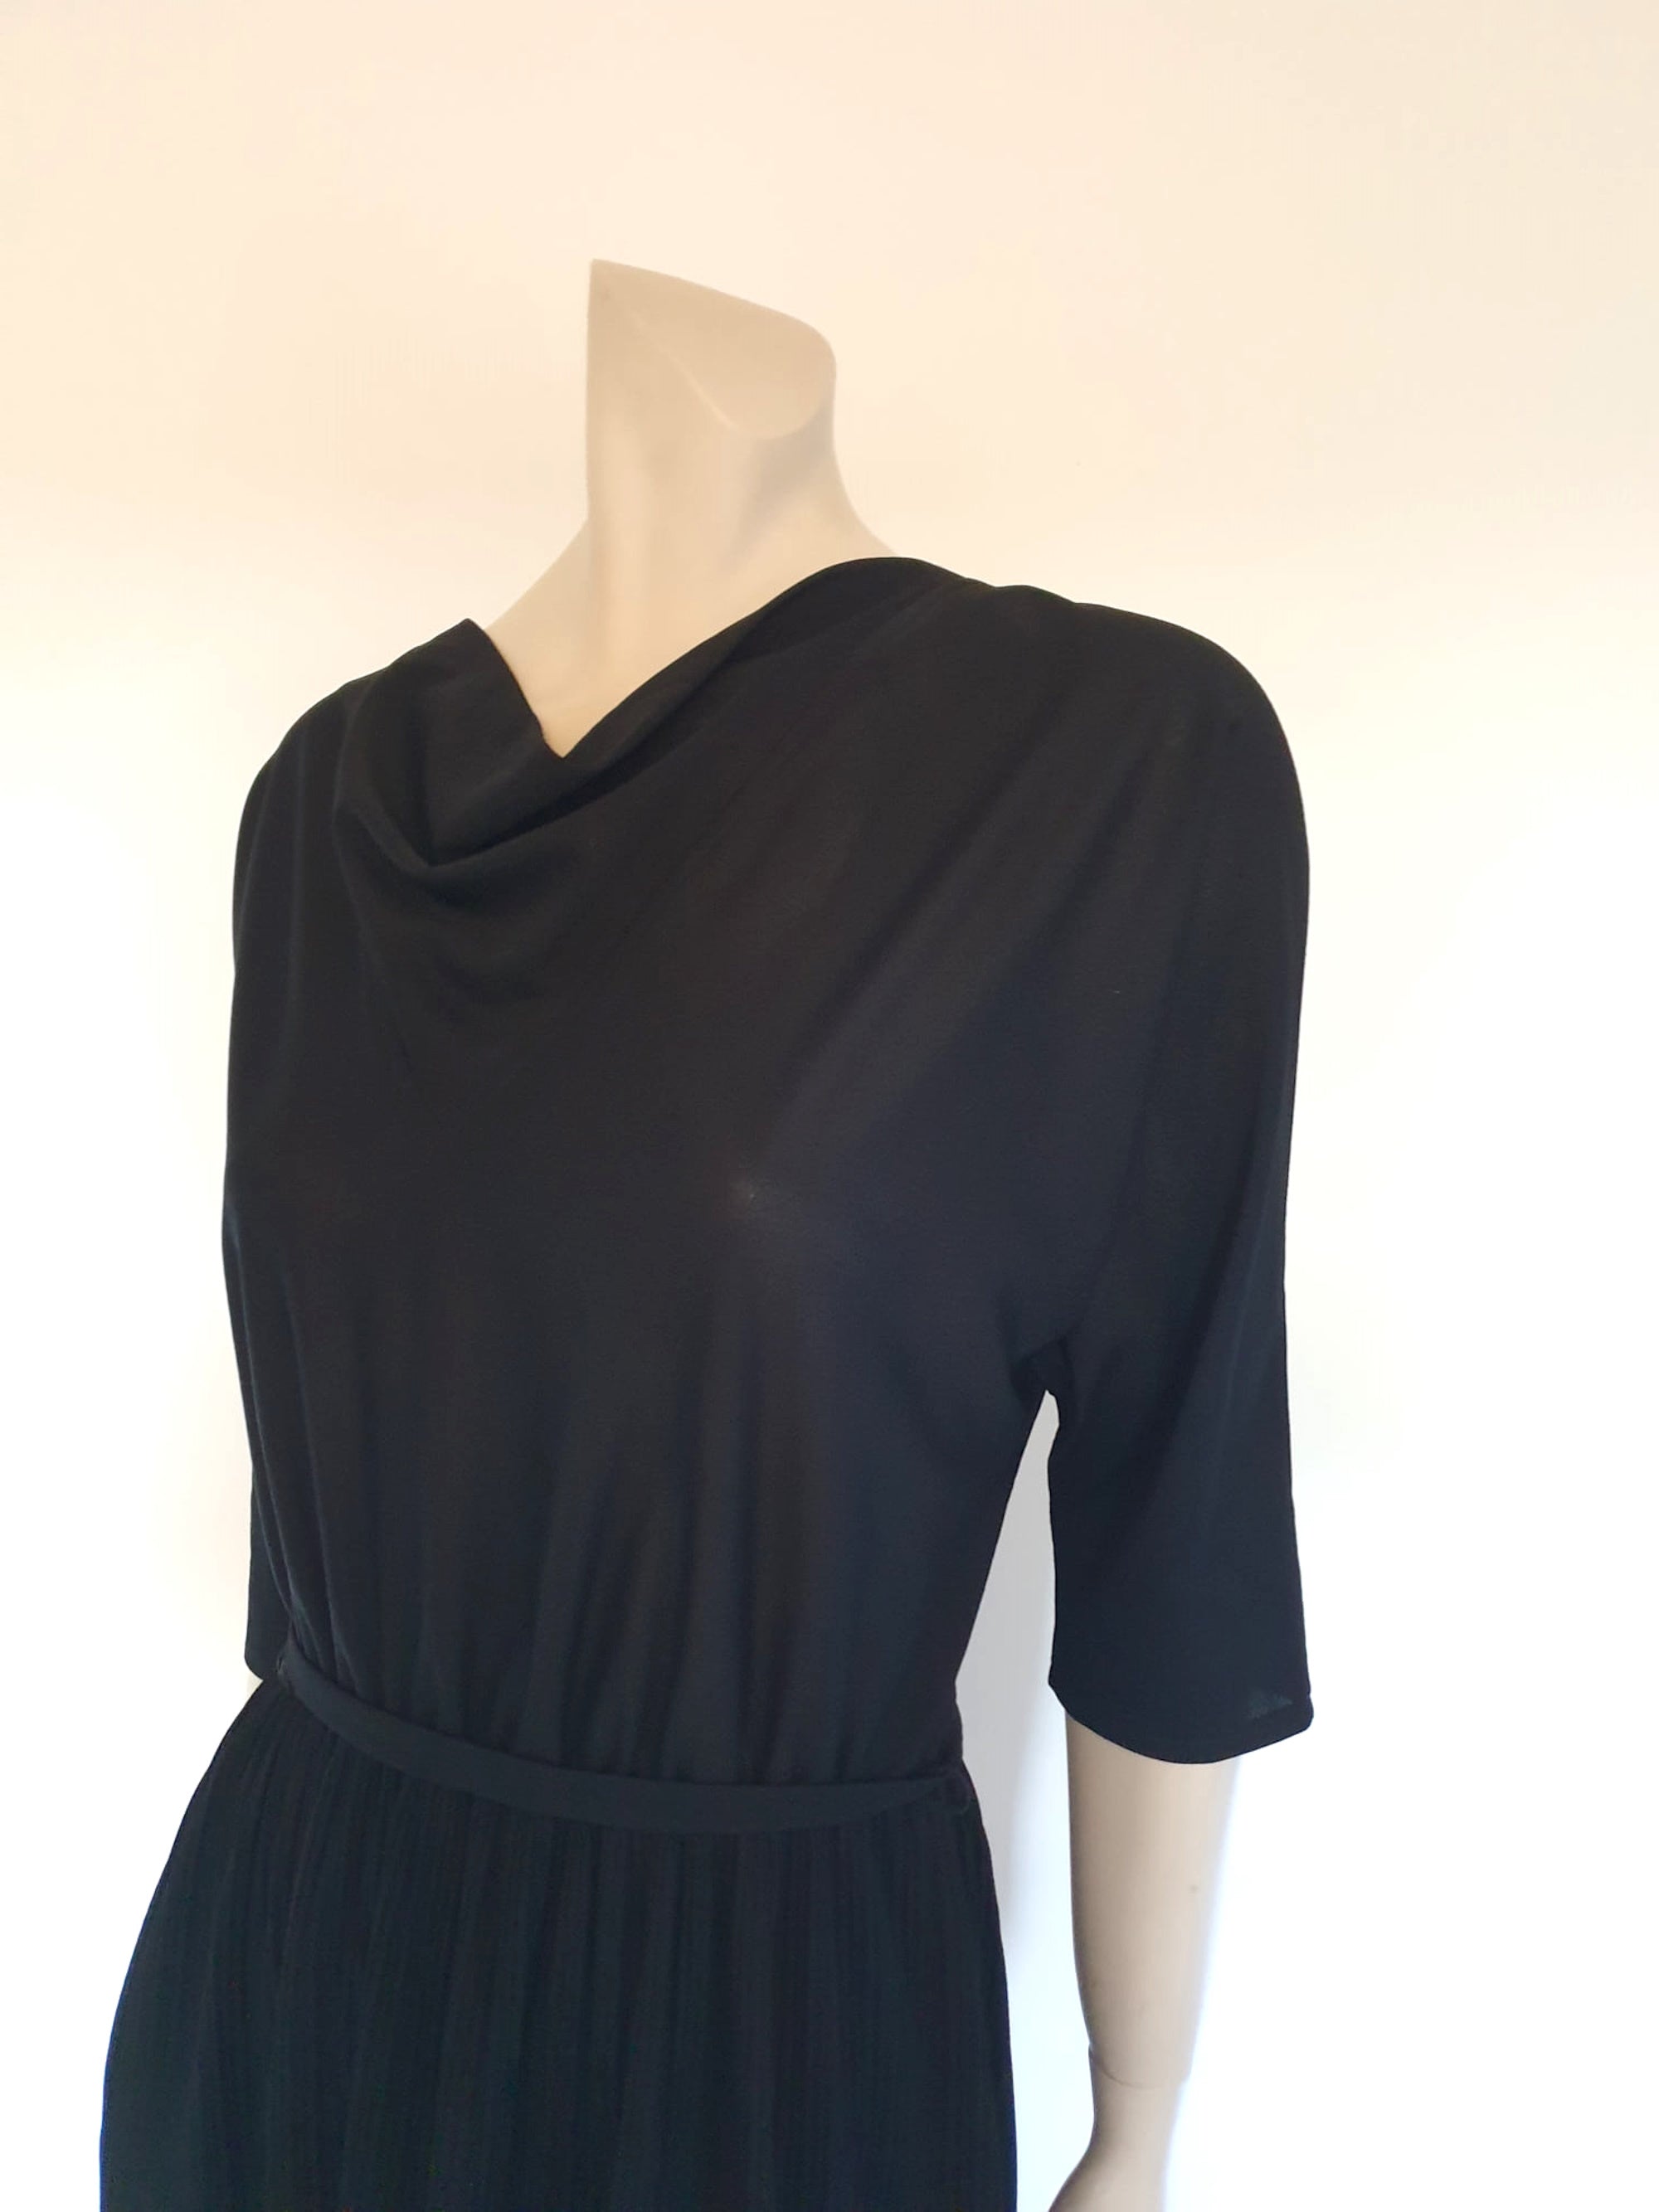 1970s black pleated dress with cowl neck and batwing sleeves by Zora medium